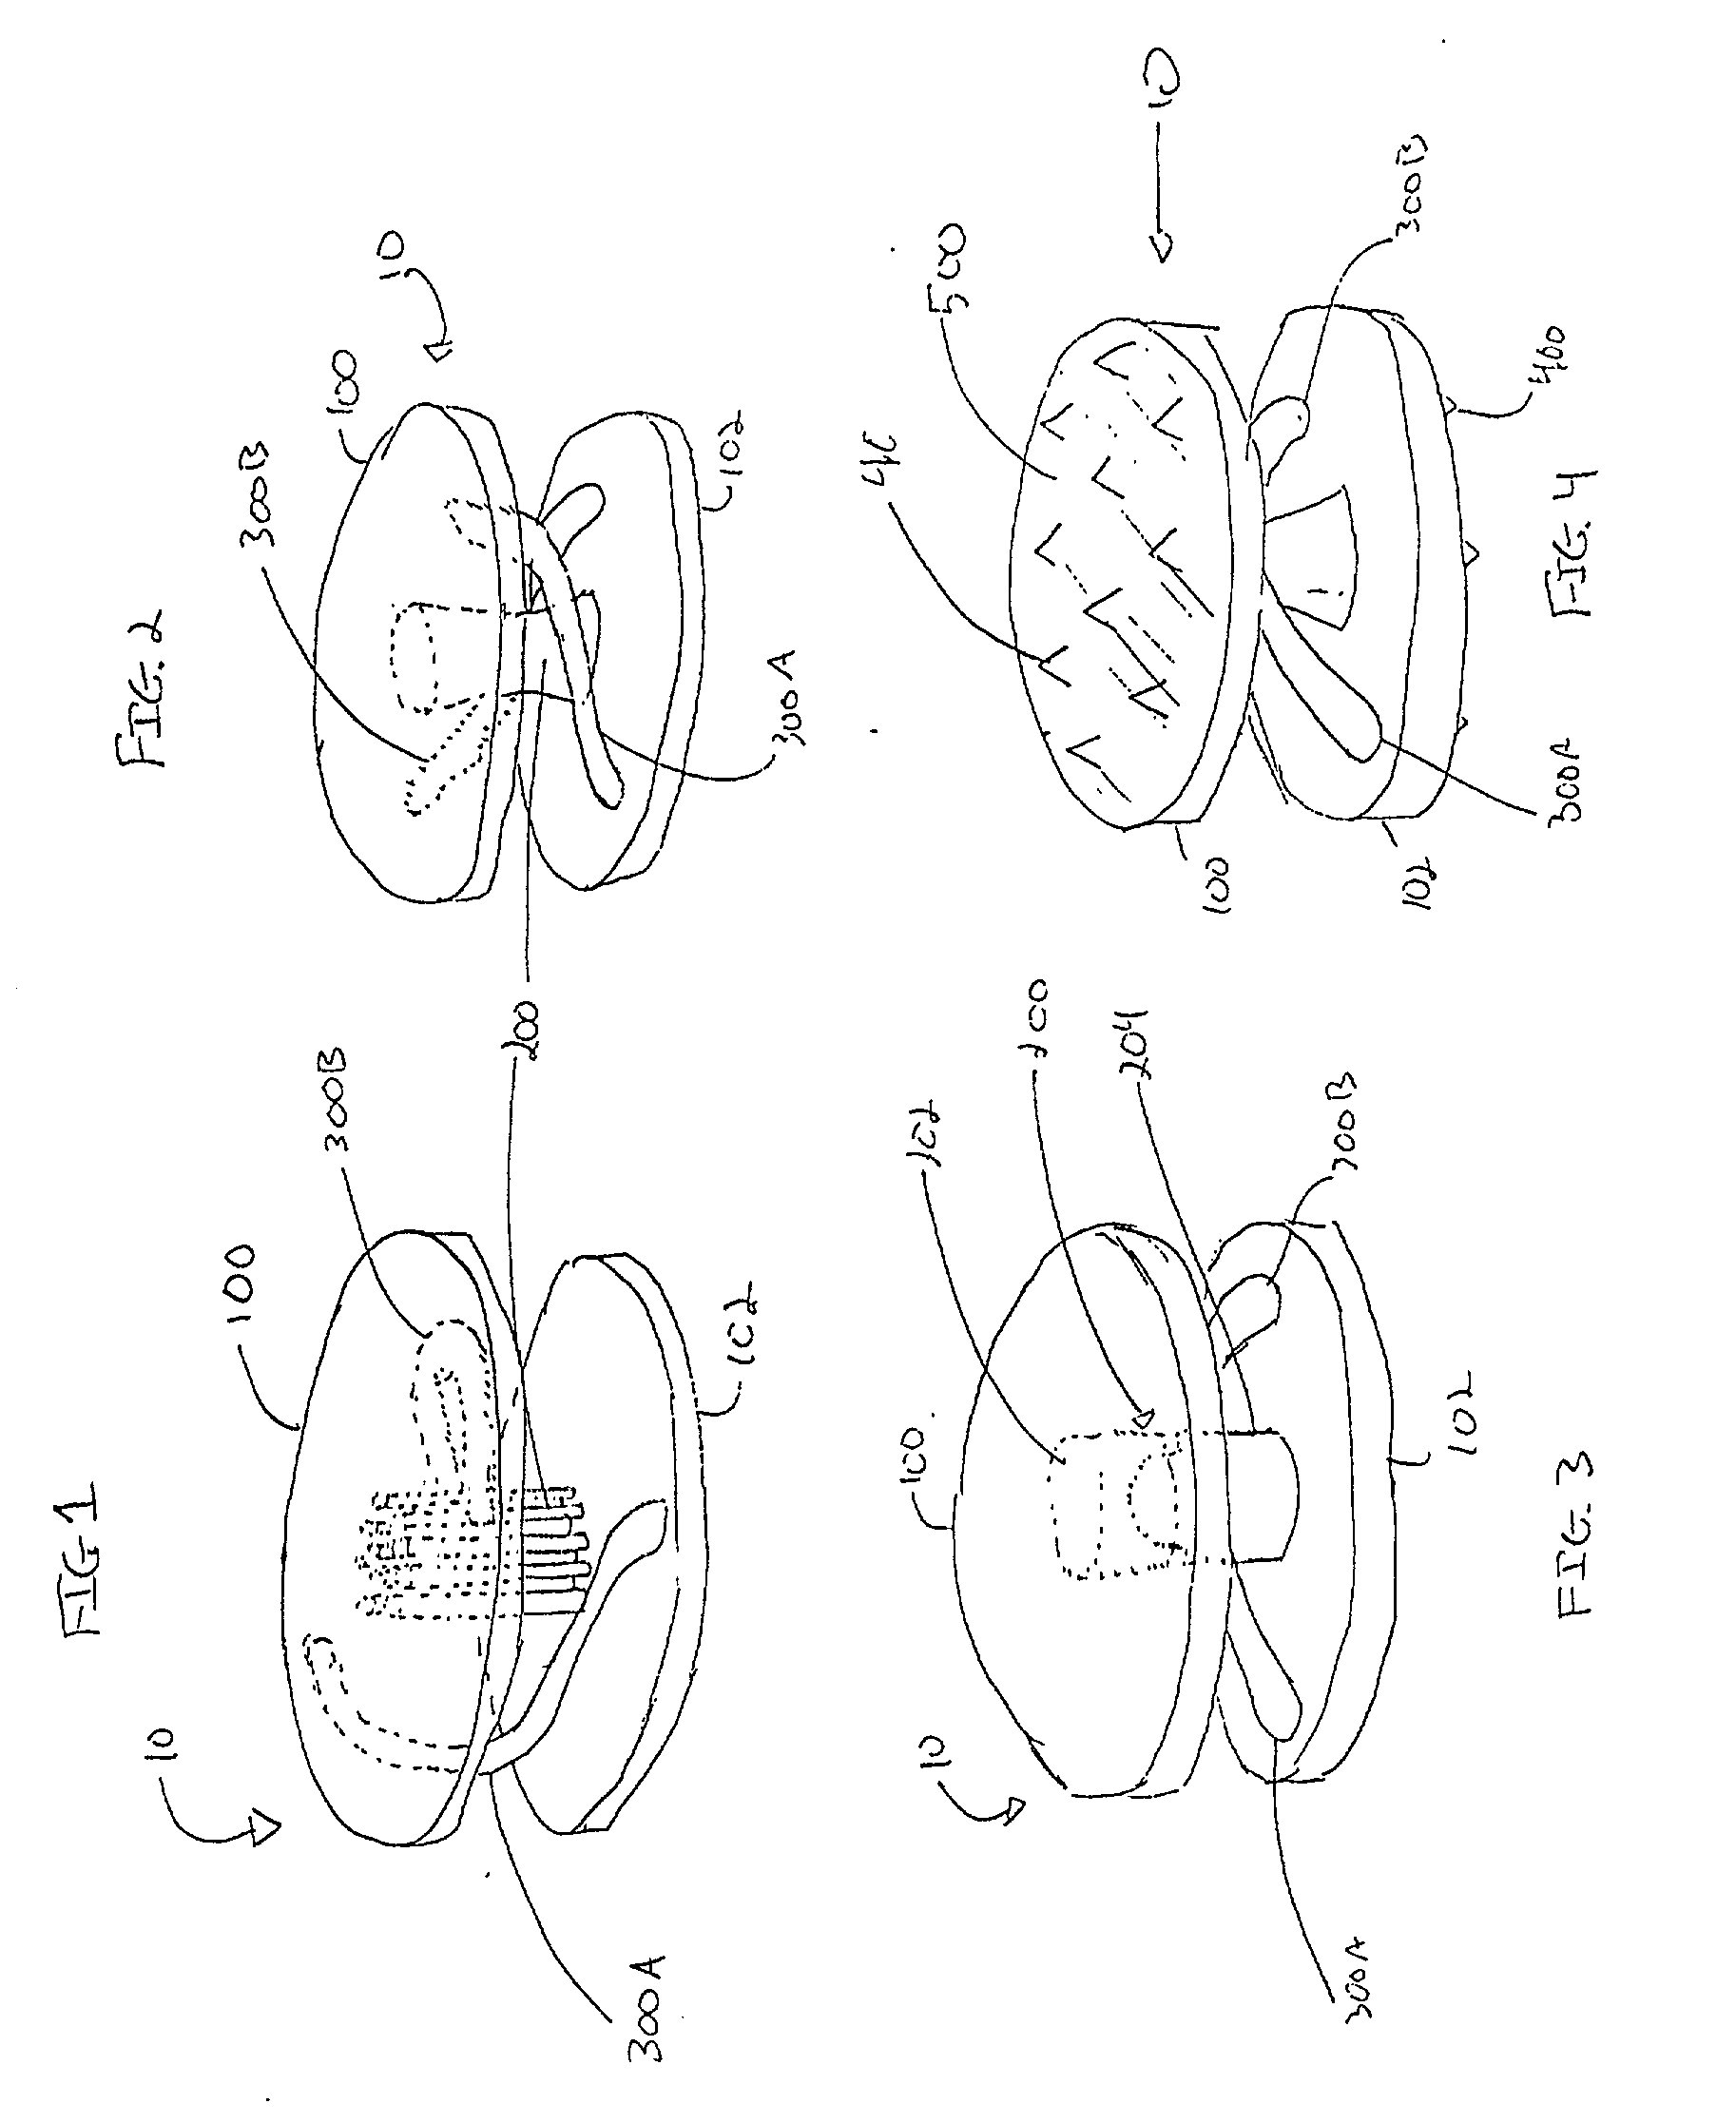 Orthopedic implant and method of making metal articles